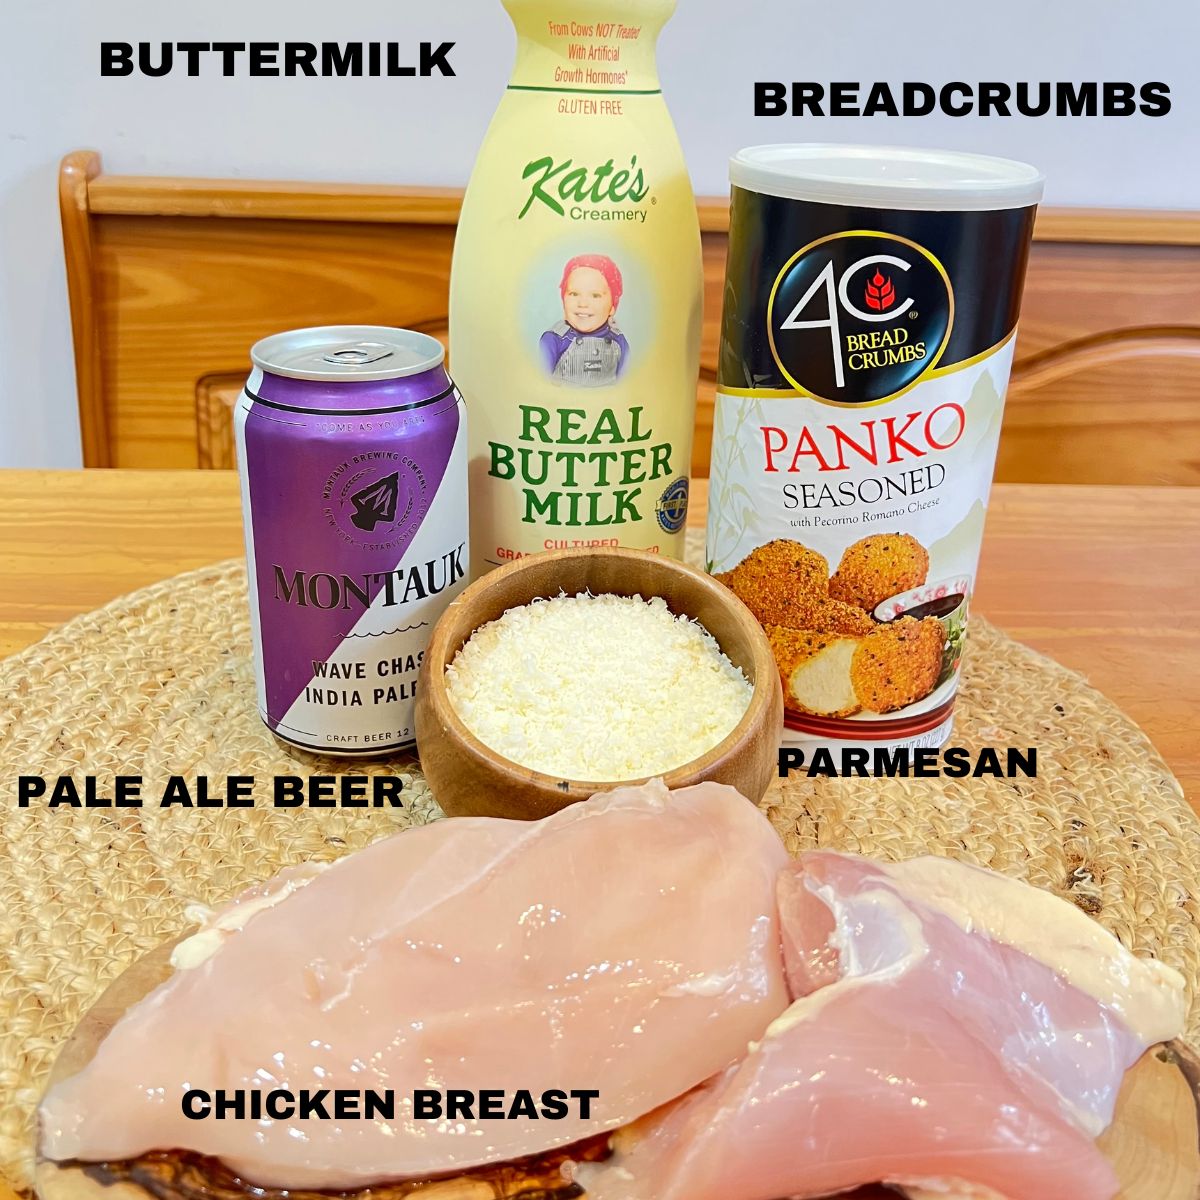 Chicken cutlets, a can of Montauk beer, a bottle of buttermilk, a can of Panko Breadcrumbs and parmesan cheese in a small wooden bowl on a table